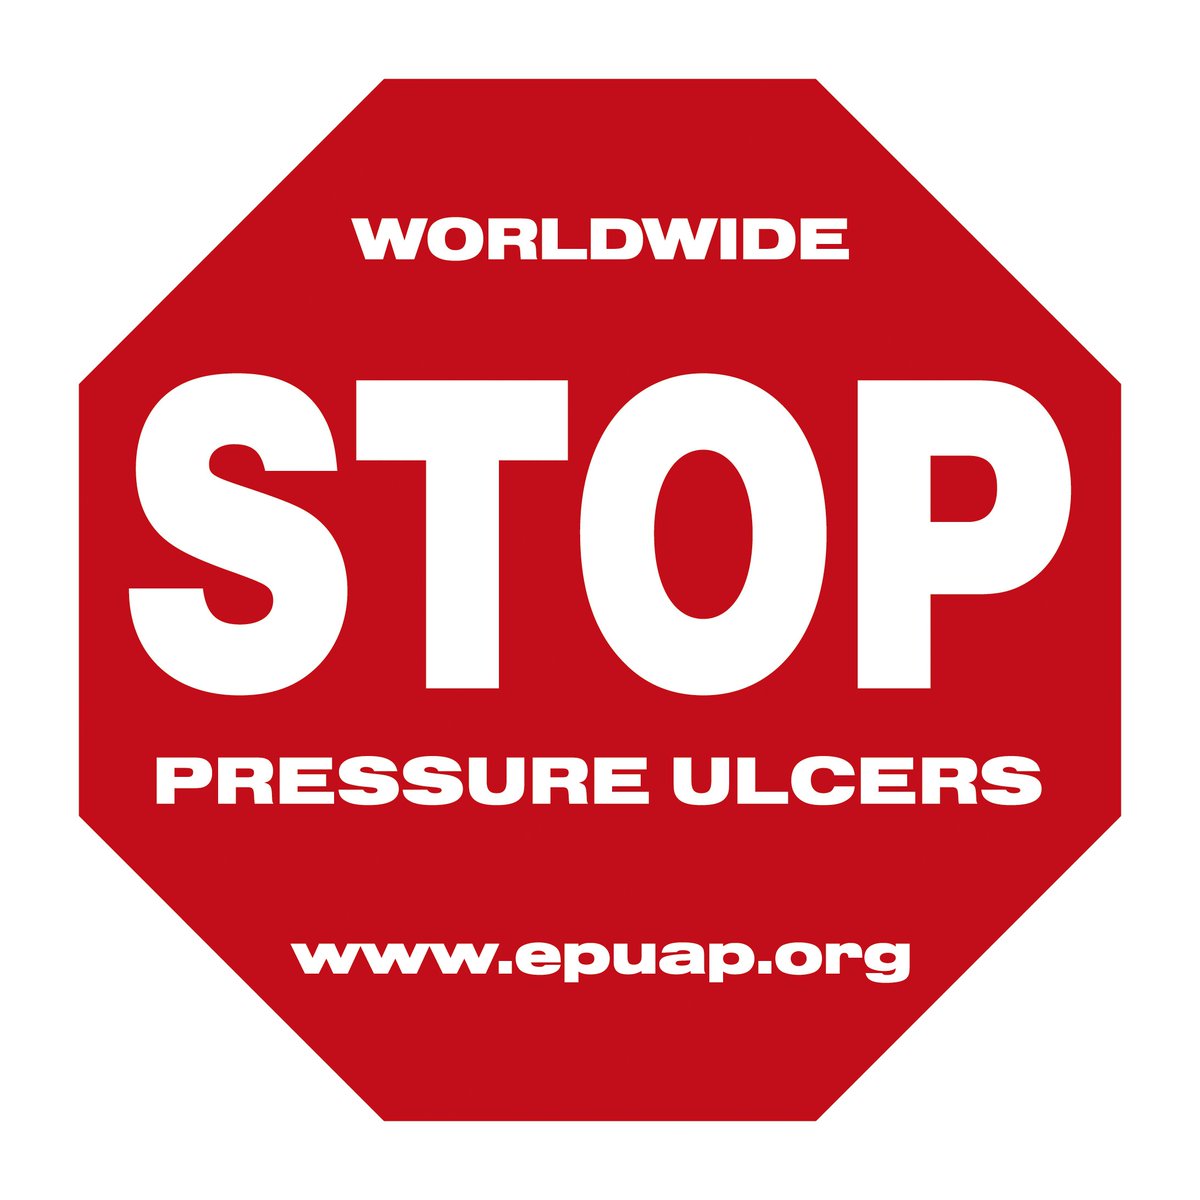 Today we mark International STOP Pressure Ulcer/ Injury Day to help raise awareness of #pressureulcers. To address this #patientsafety priority, @NationalQPS in collab with @NurMidONMSD recently commenced an Improvement Programme for the prevention & management of chronic wounds.